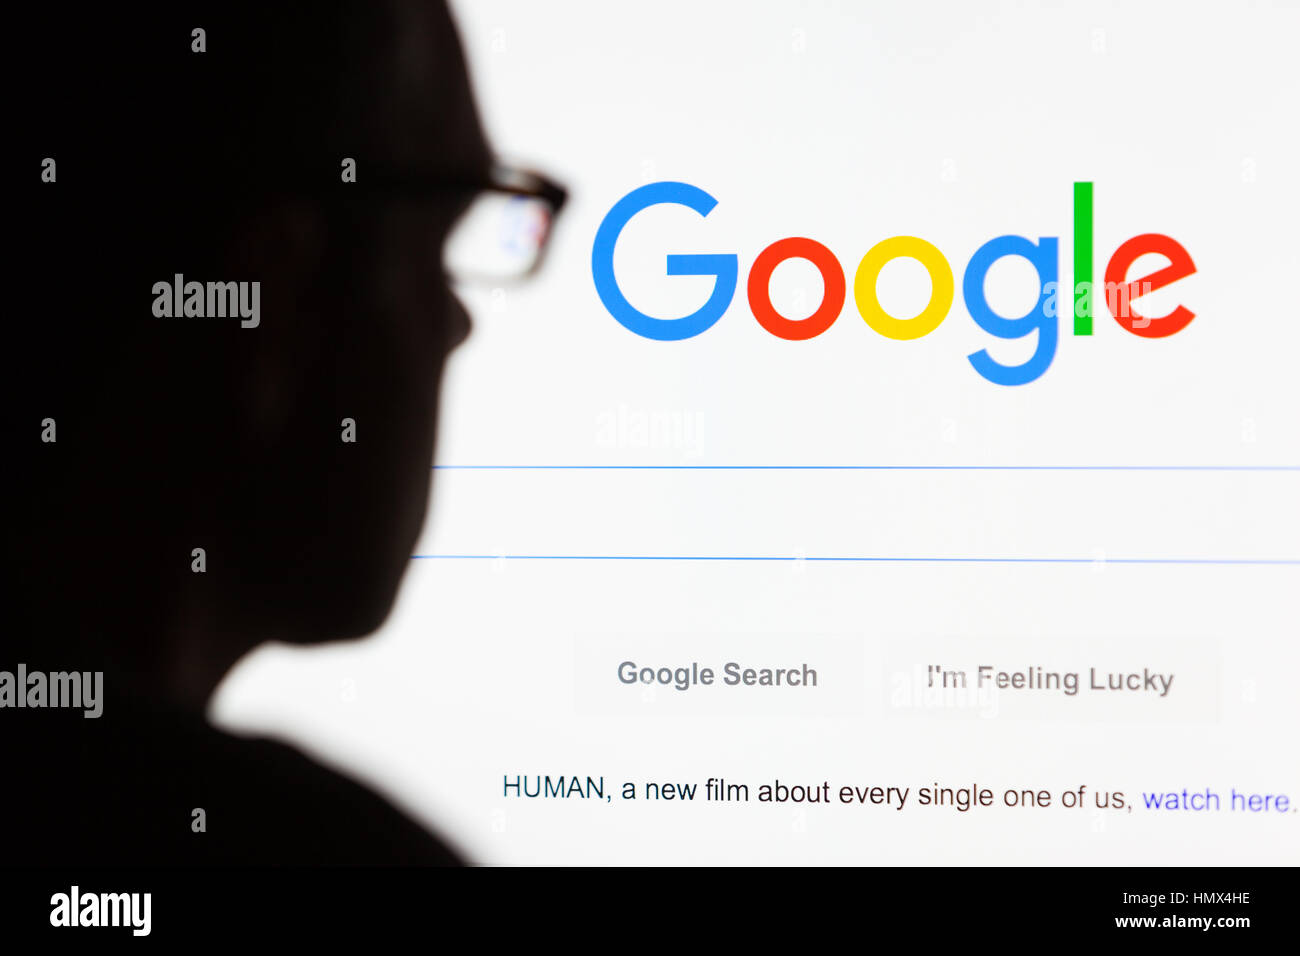 BATH, UK - SEPTEMBER 12, 2015: Close-up of the Google.com search homepage displayed on a LCD computer screen with the silhouette of a man's head out o Stock Photo